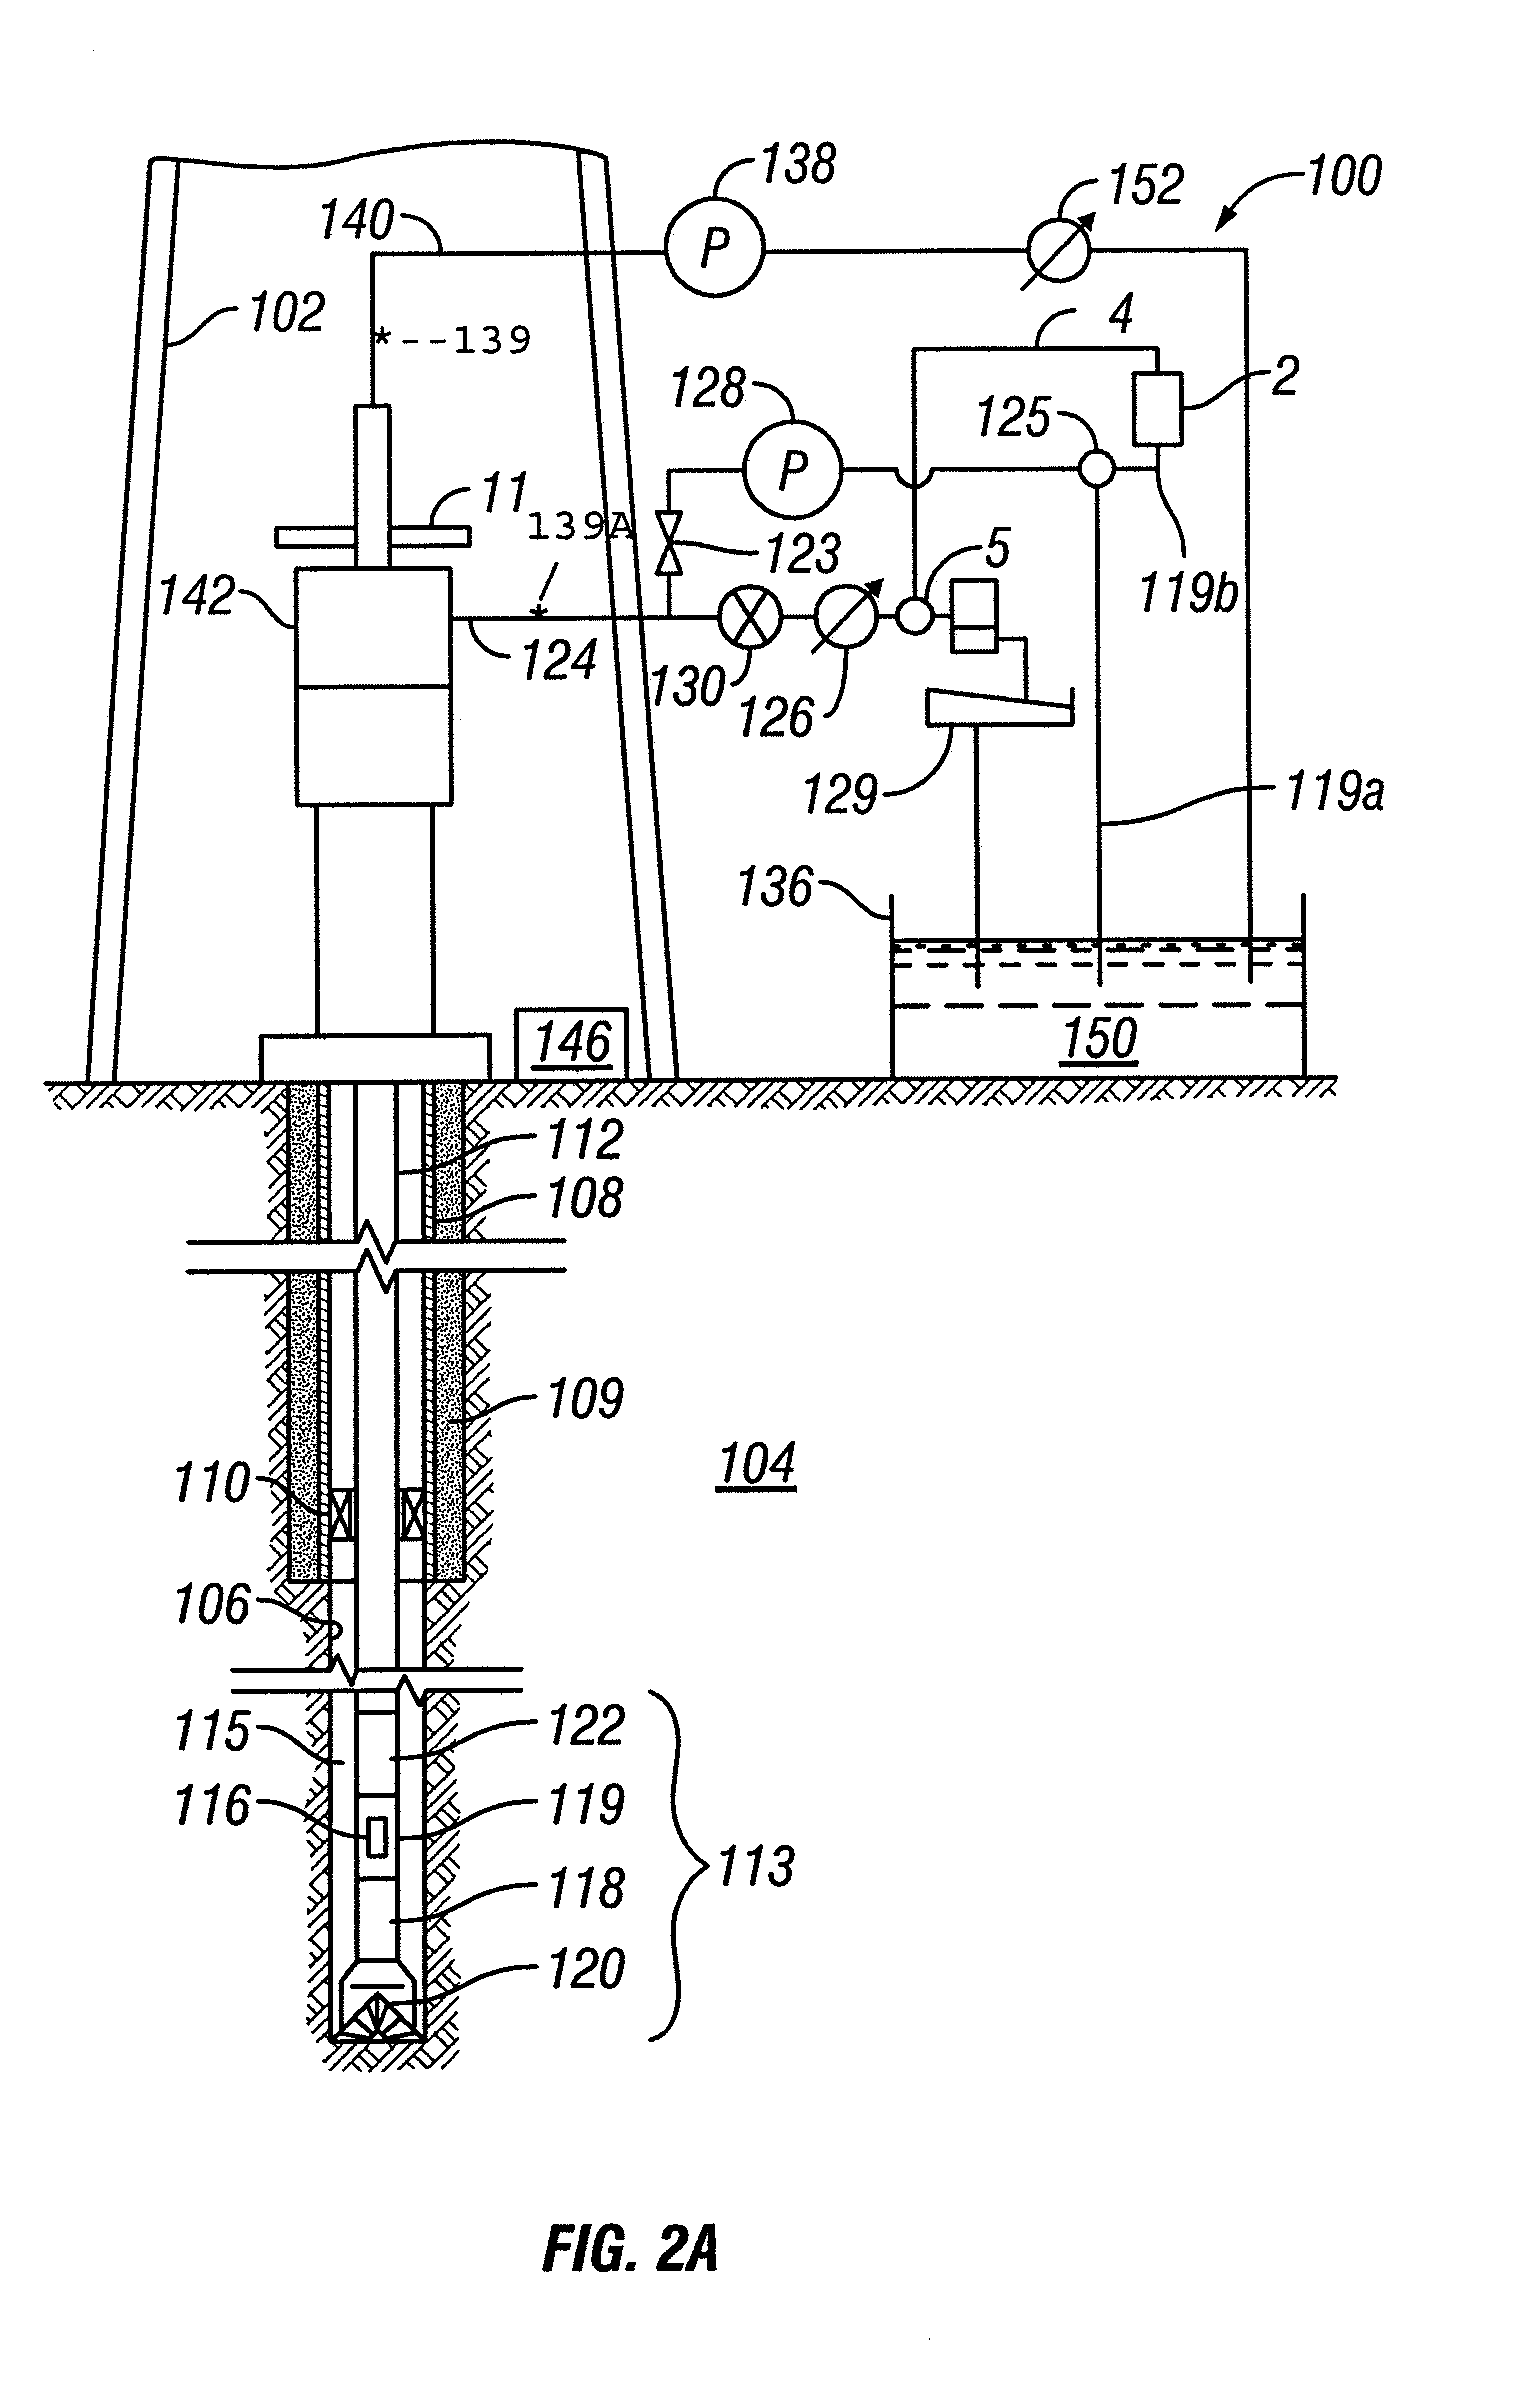 Method for determining fluid control events in a borehole using a dynamic annular pressure control system